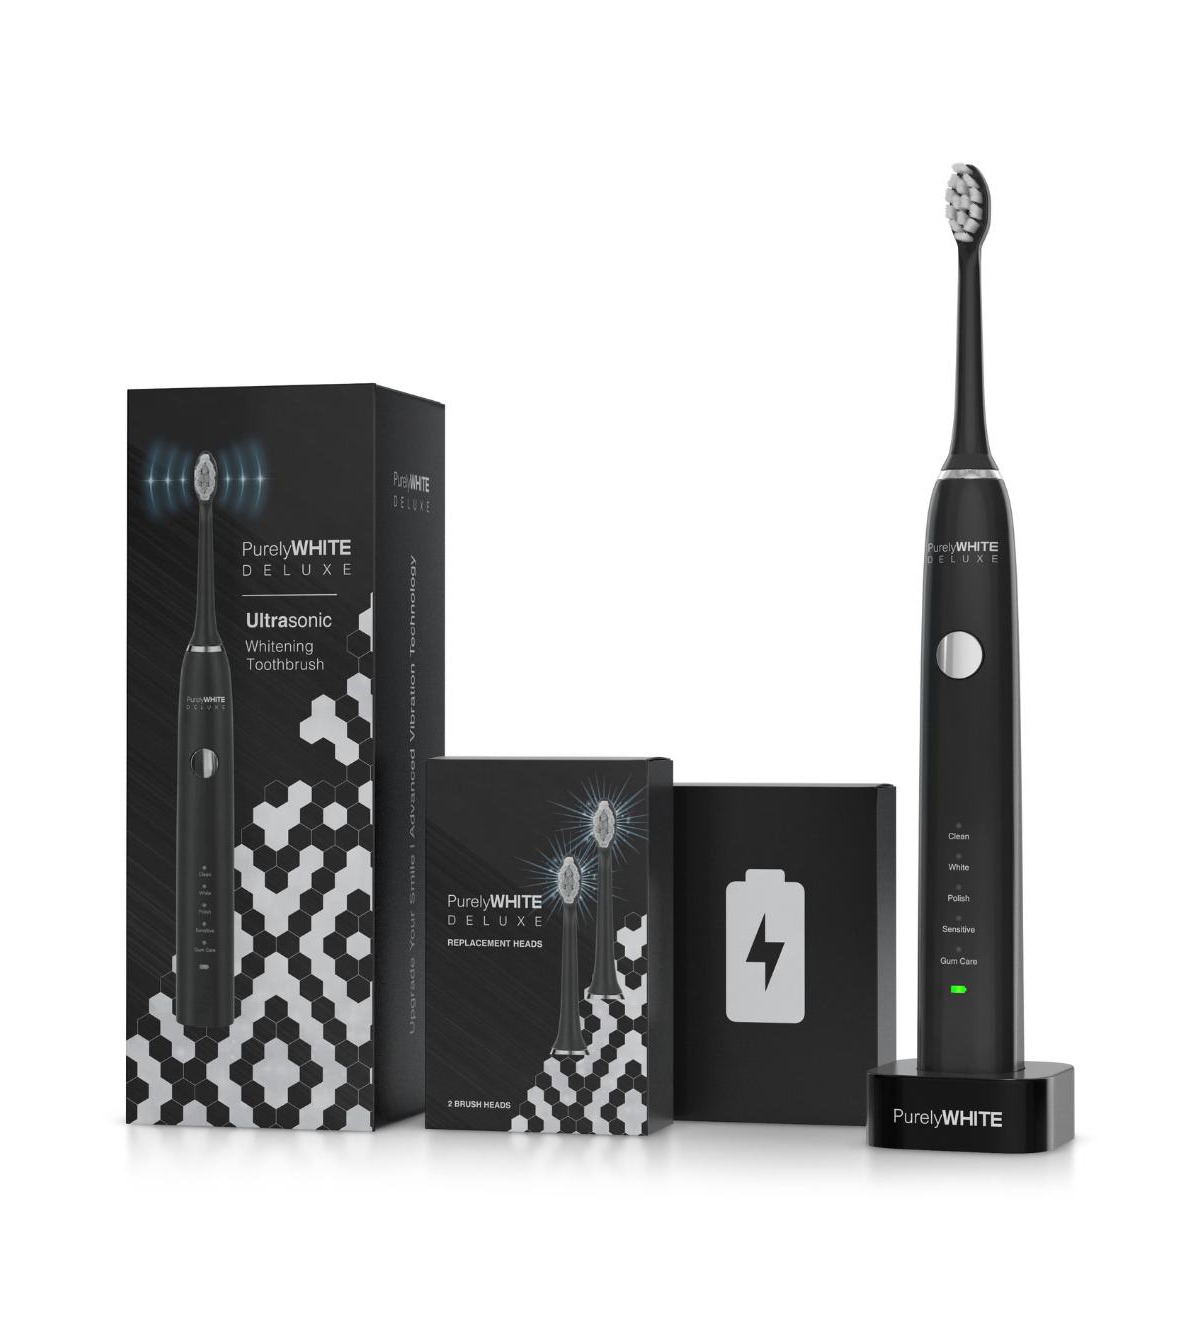 Purelywhite Deluxe Purely White Deluxe Ultra Series Electric Toothbrush In Black